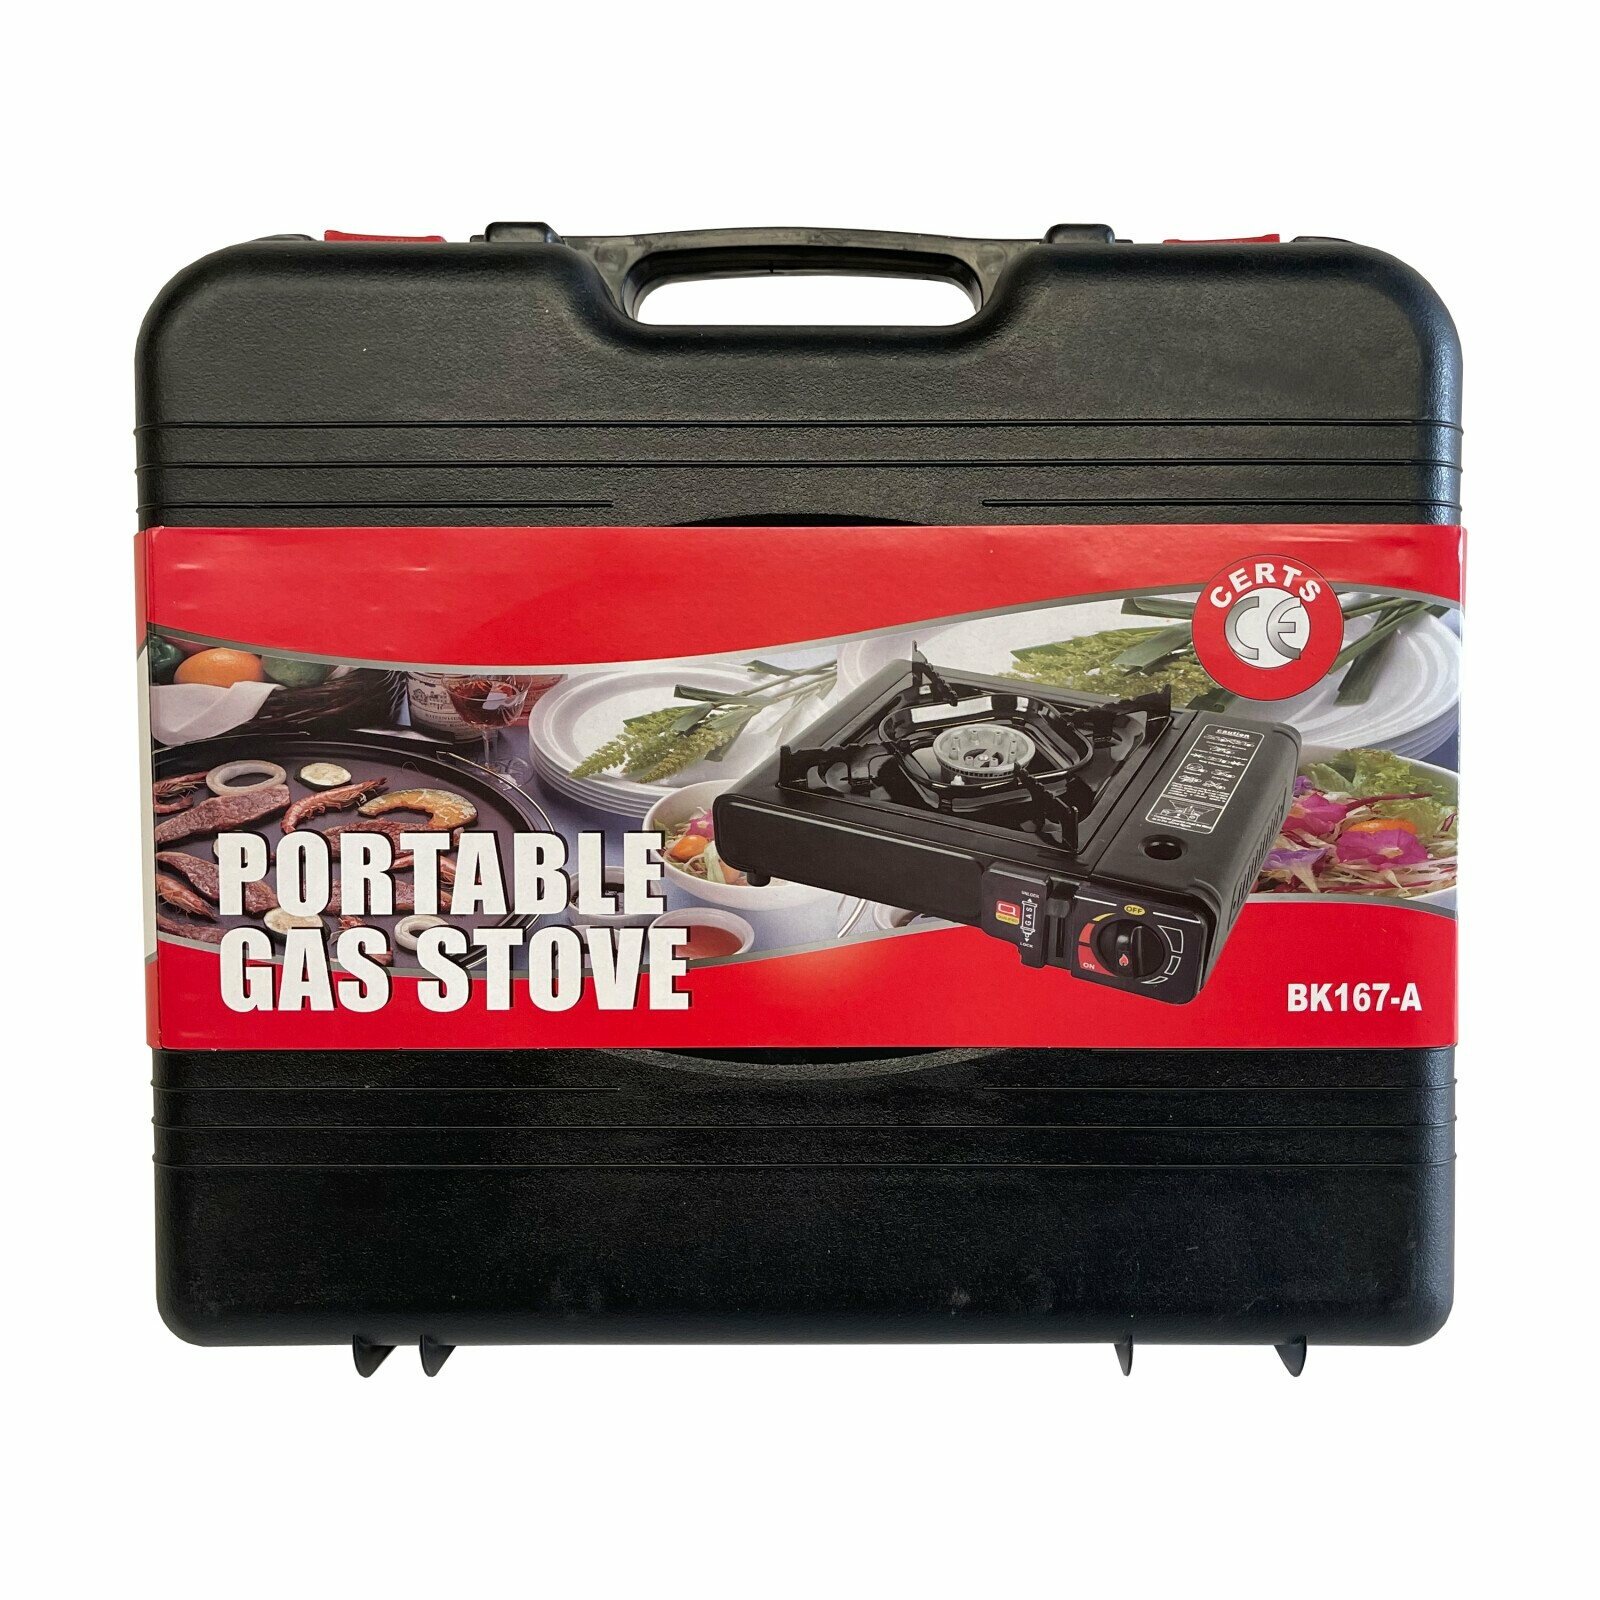 Portable gas stove for camping, butane gas cartridge operation thumb